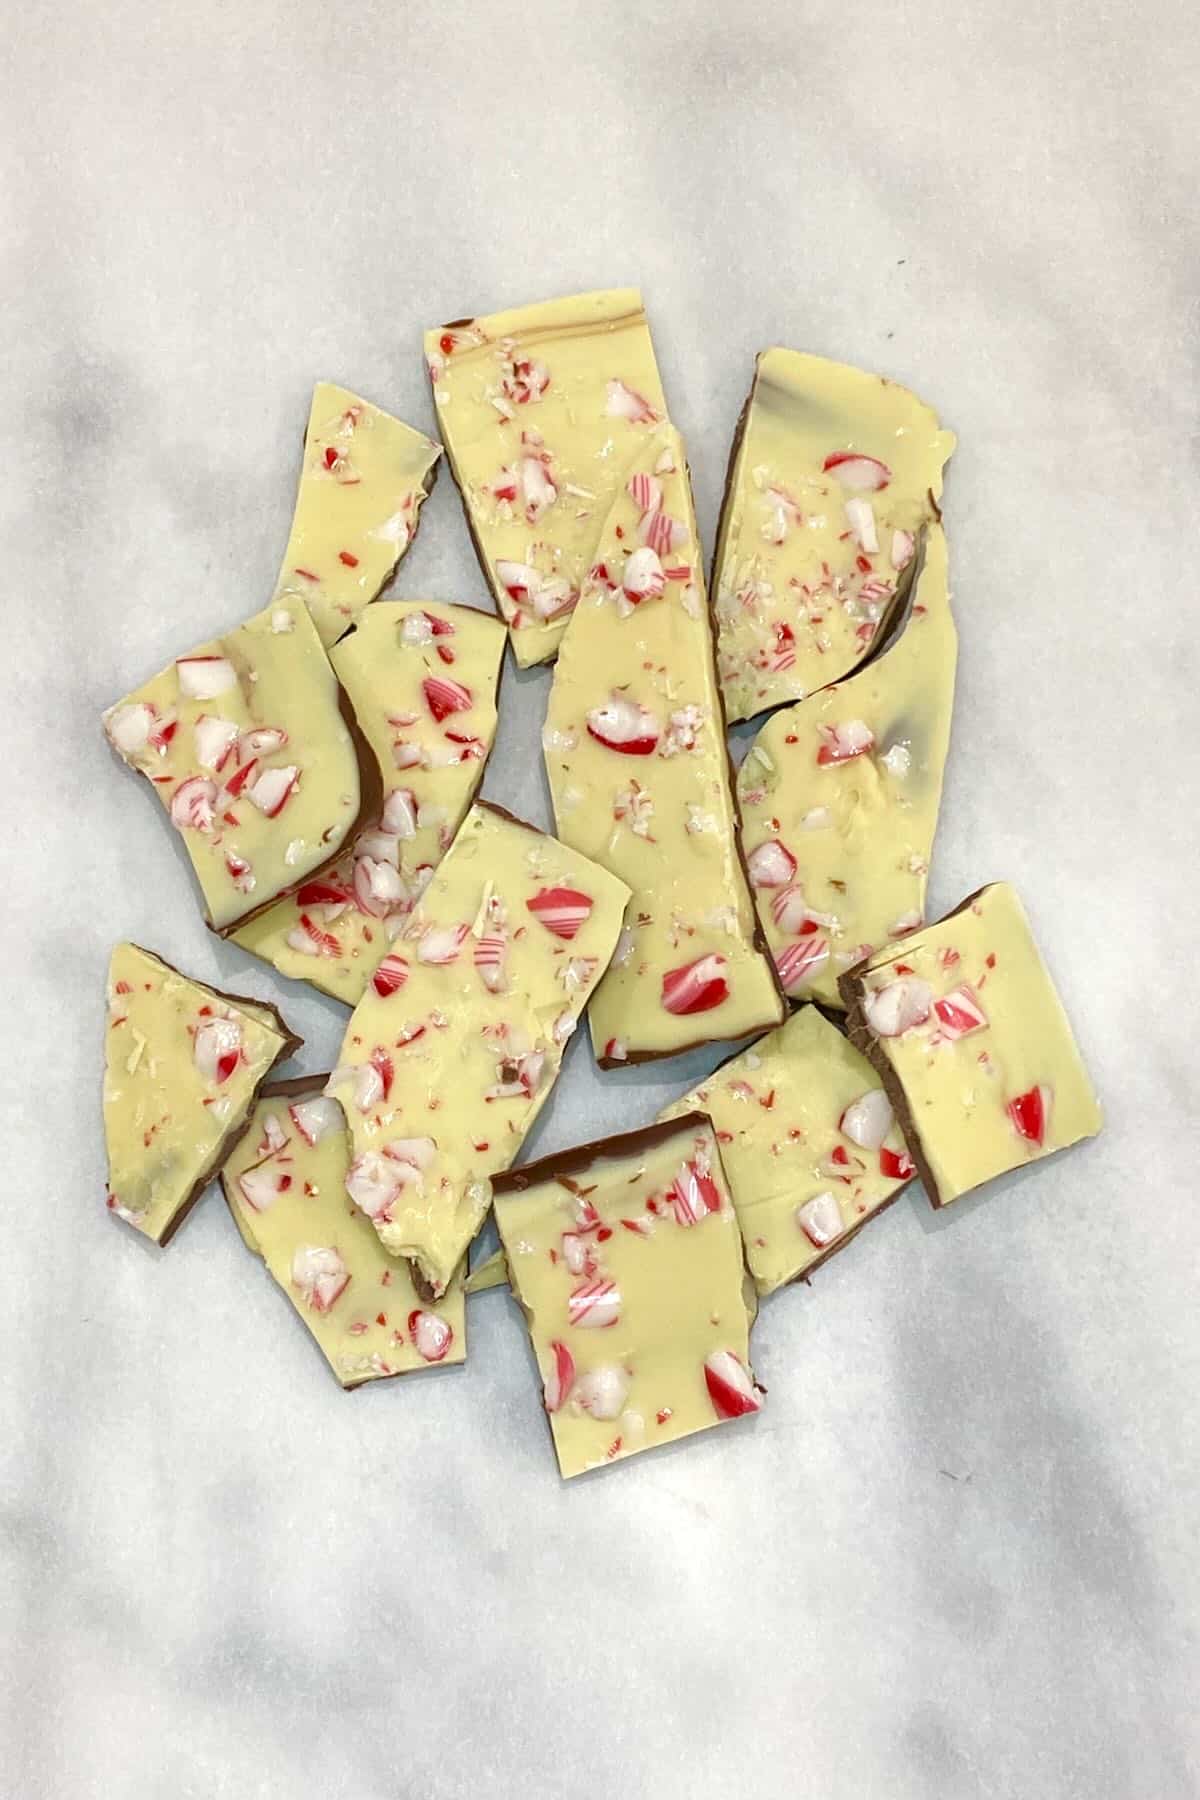 Pieces of peppermint chocolate bark